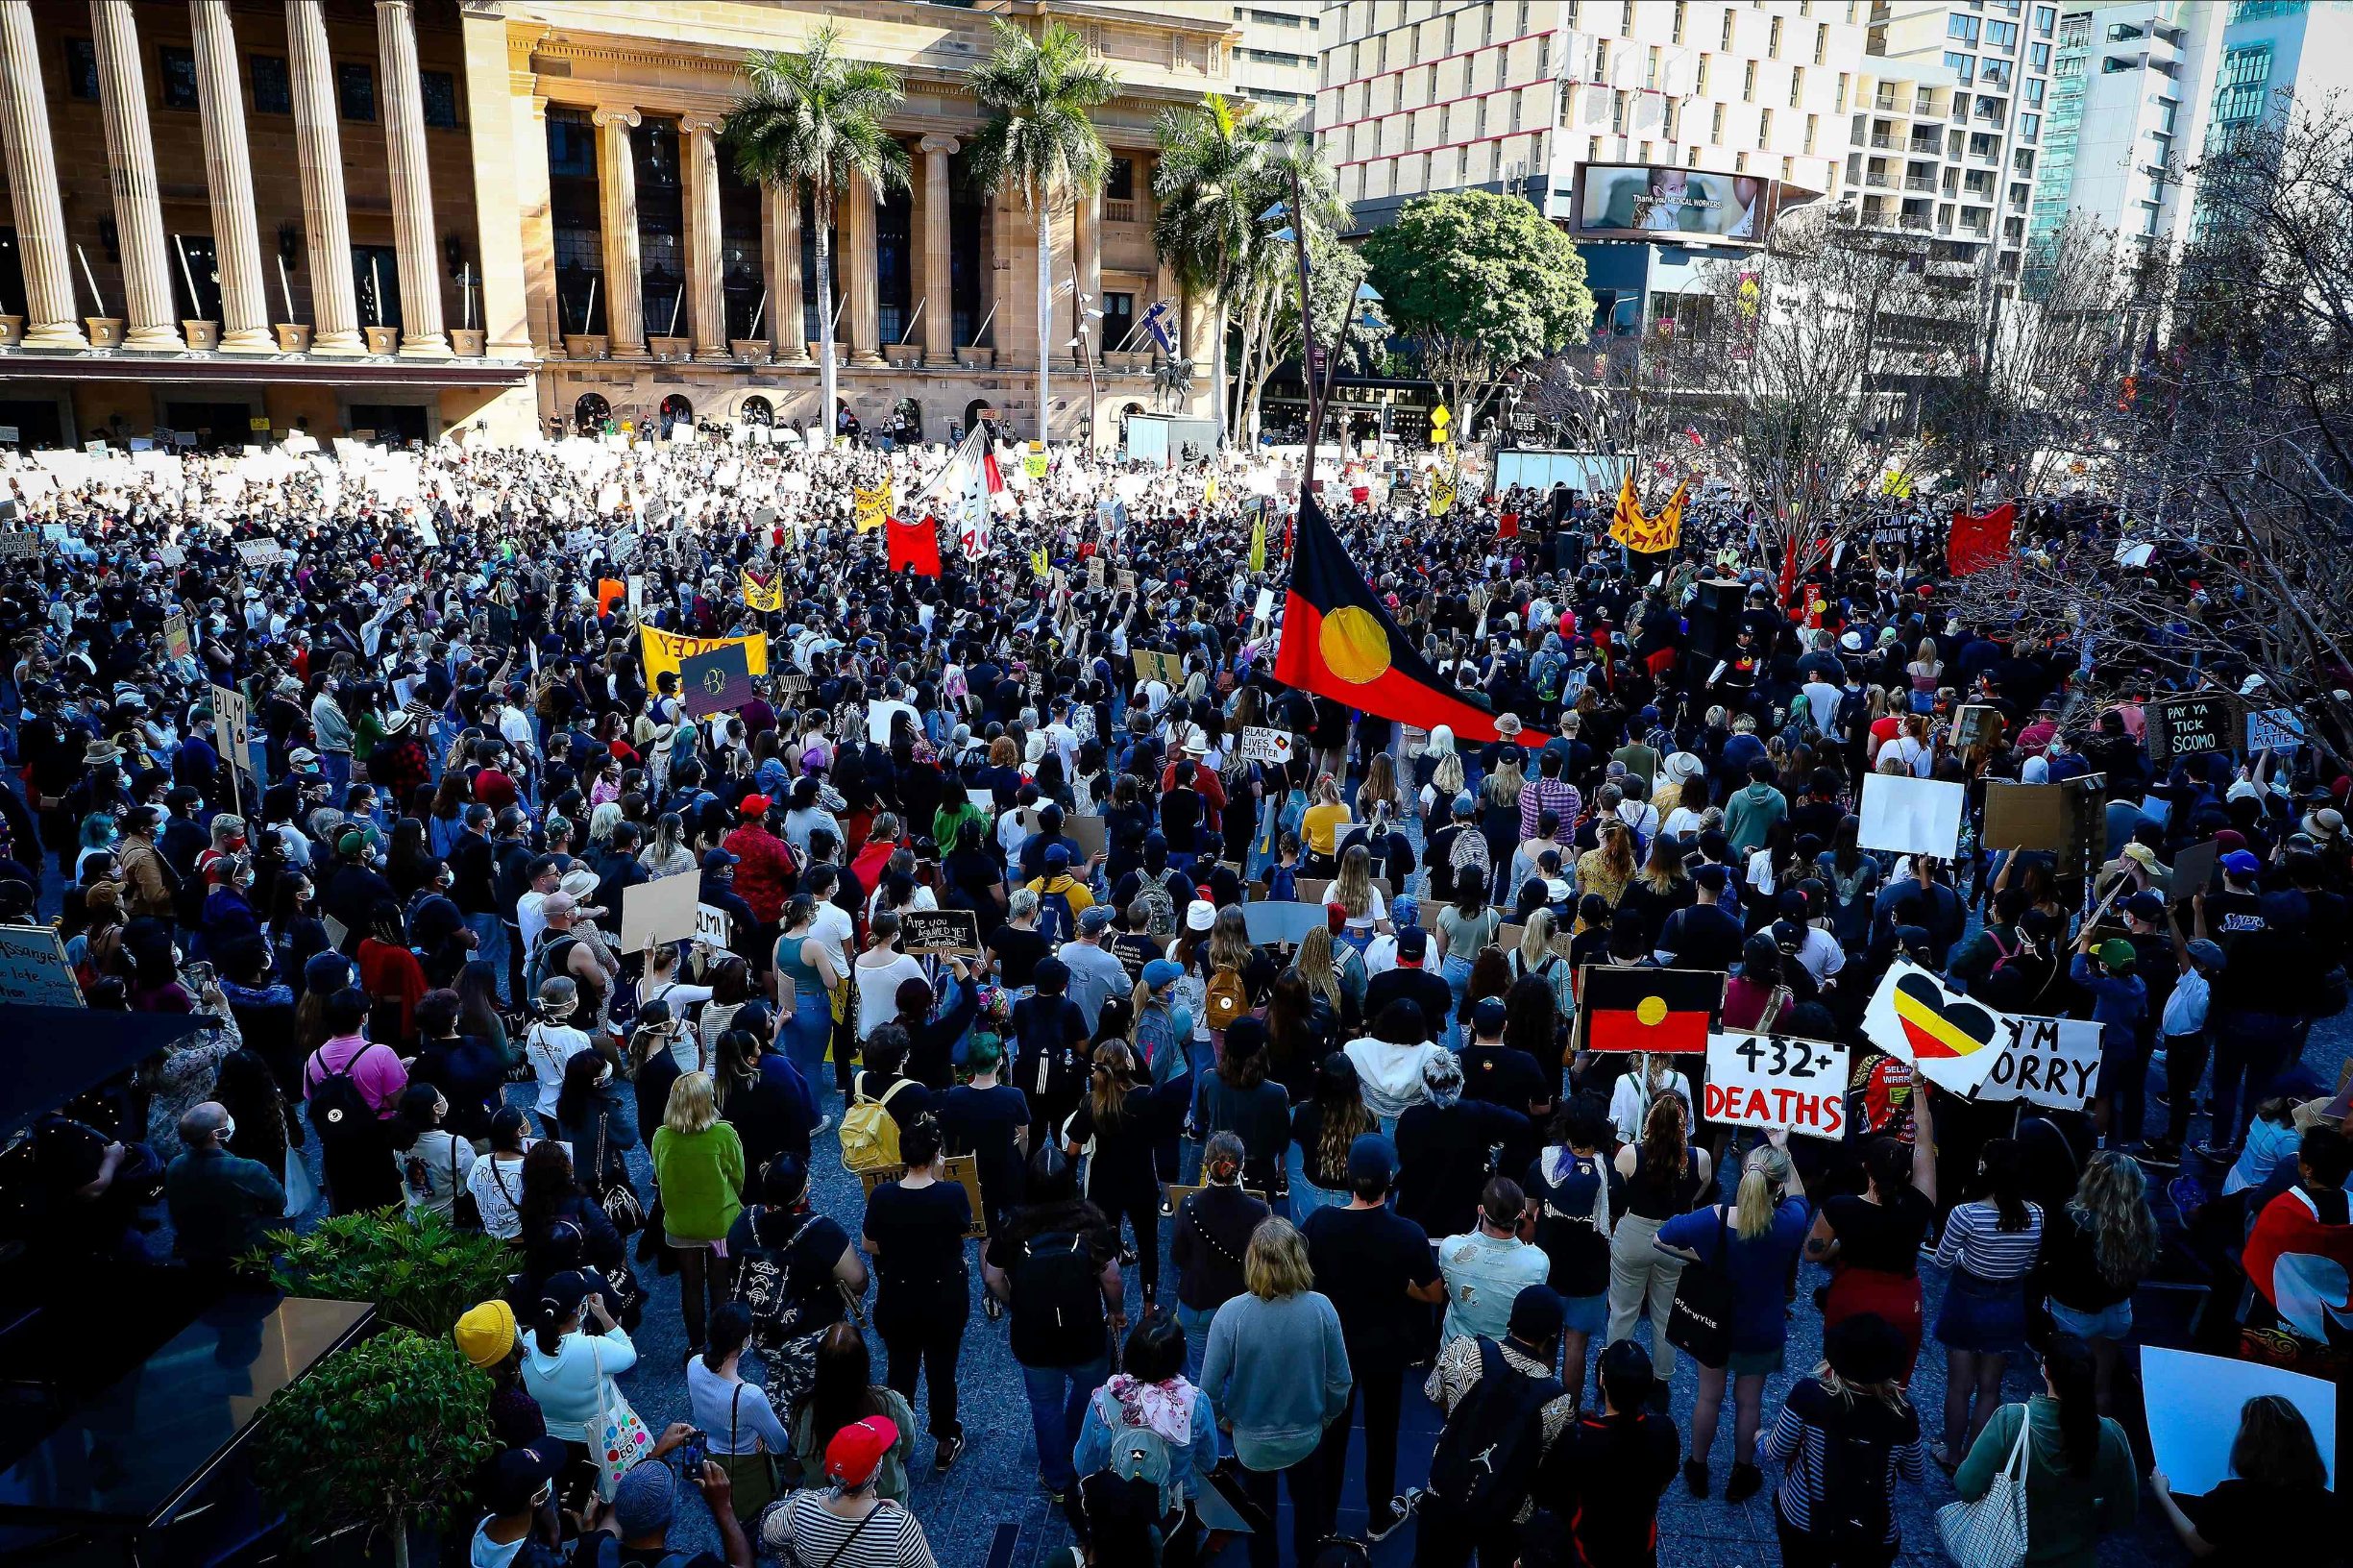 Demonstrators attend a Black Lives Matter protest to express solidarity with US protestors at King George Square in Brisbane on June 6, 2020 and demand an end to frequent Aboriginal deaths in custody in Australia. - Tens of thousands of Australians defied government calls to stay at home on June 6, spilling onto the streets for Black Lives Matter protests in major towns and cities across the country. (Photo by Patrick HAMILTON / AFP)